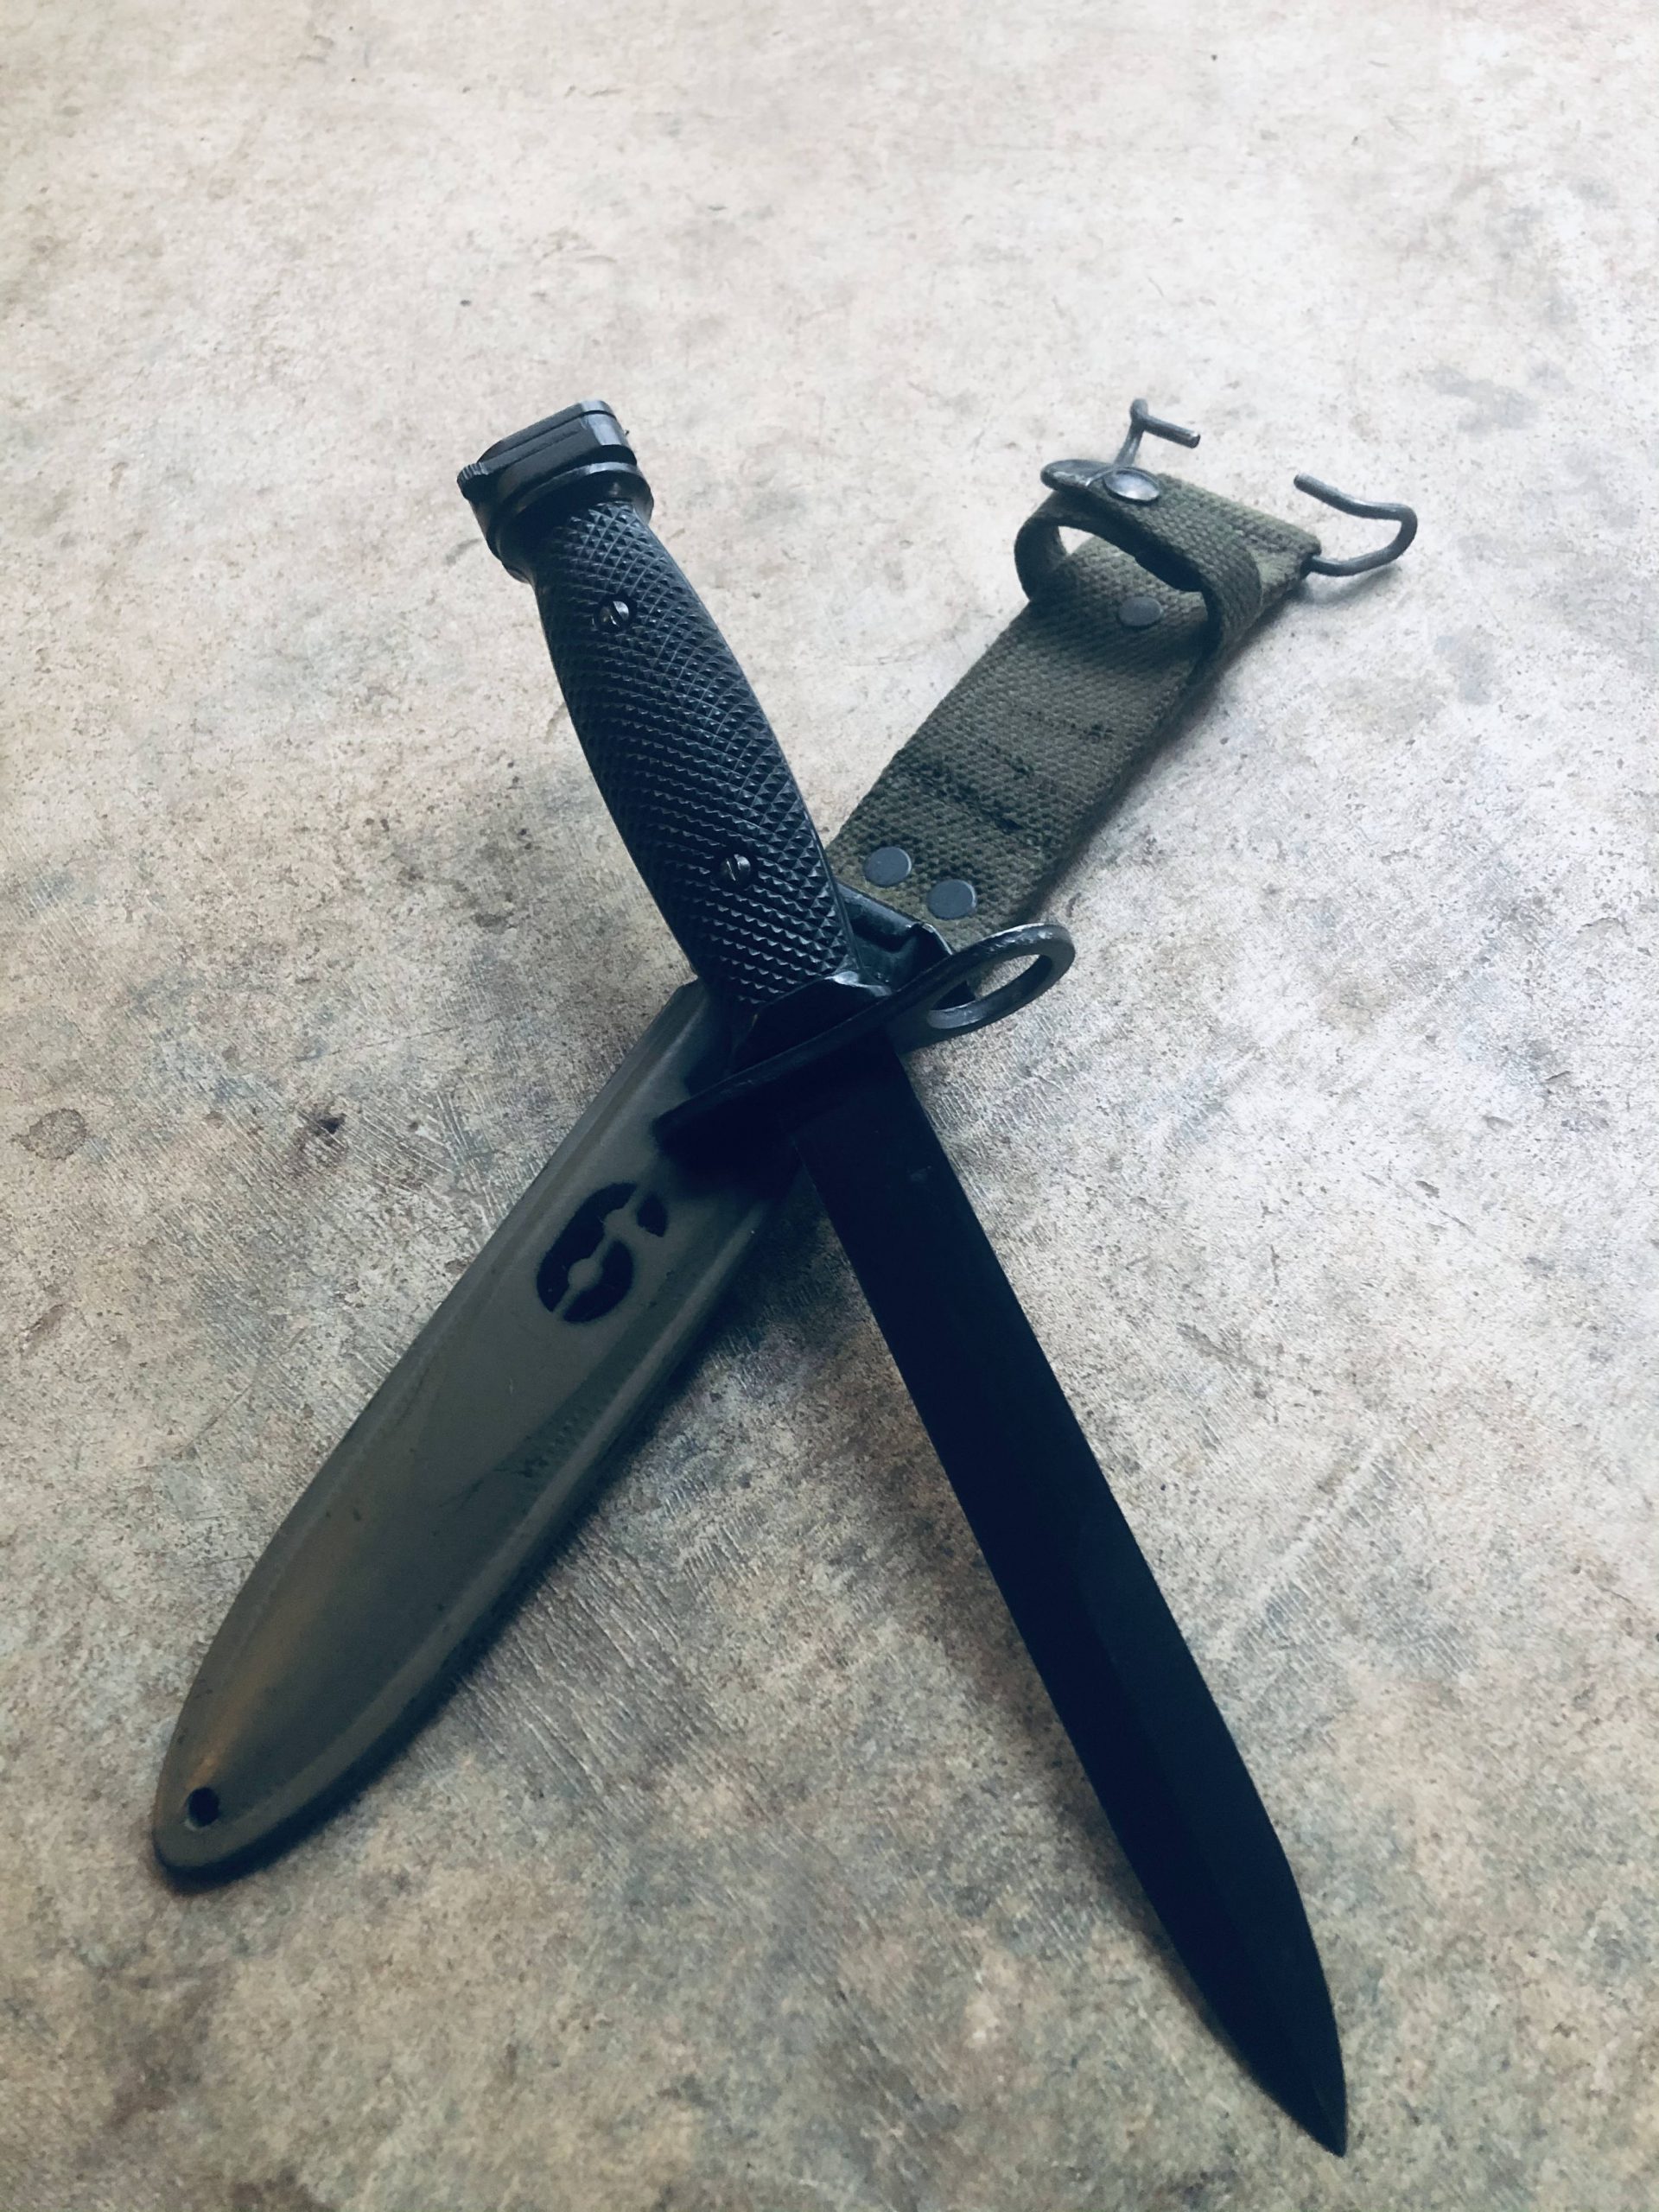 Original M7 Bayonet with M8A1 Scabbard for M16A1 and M16A2 